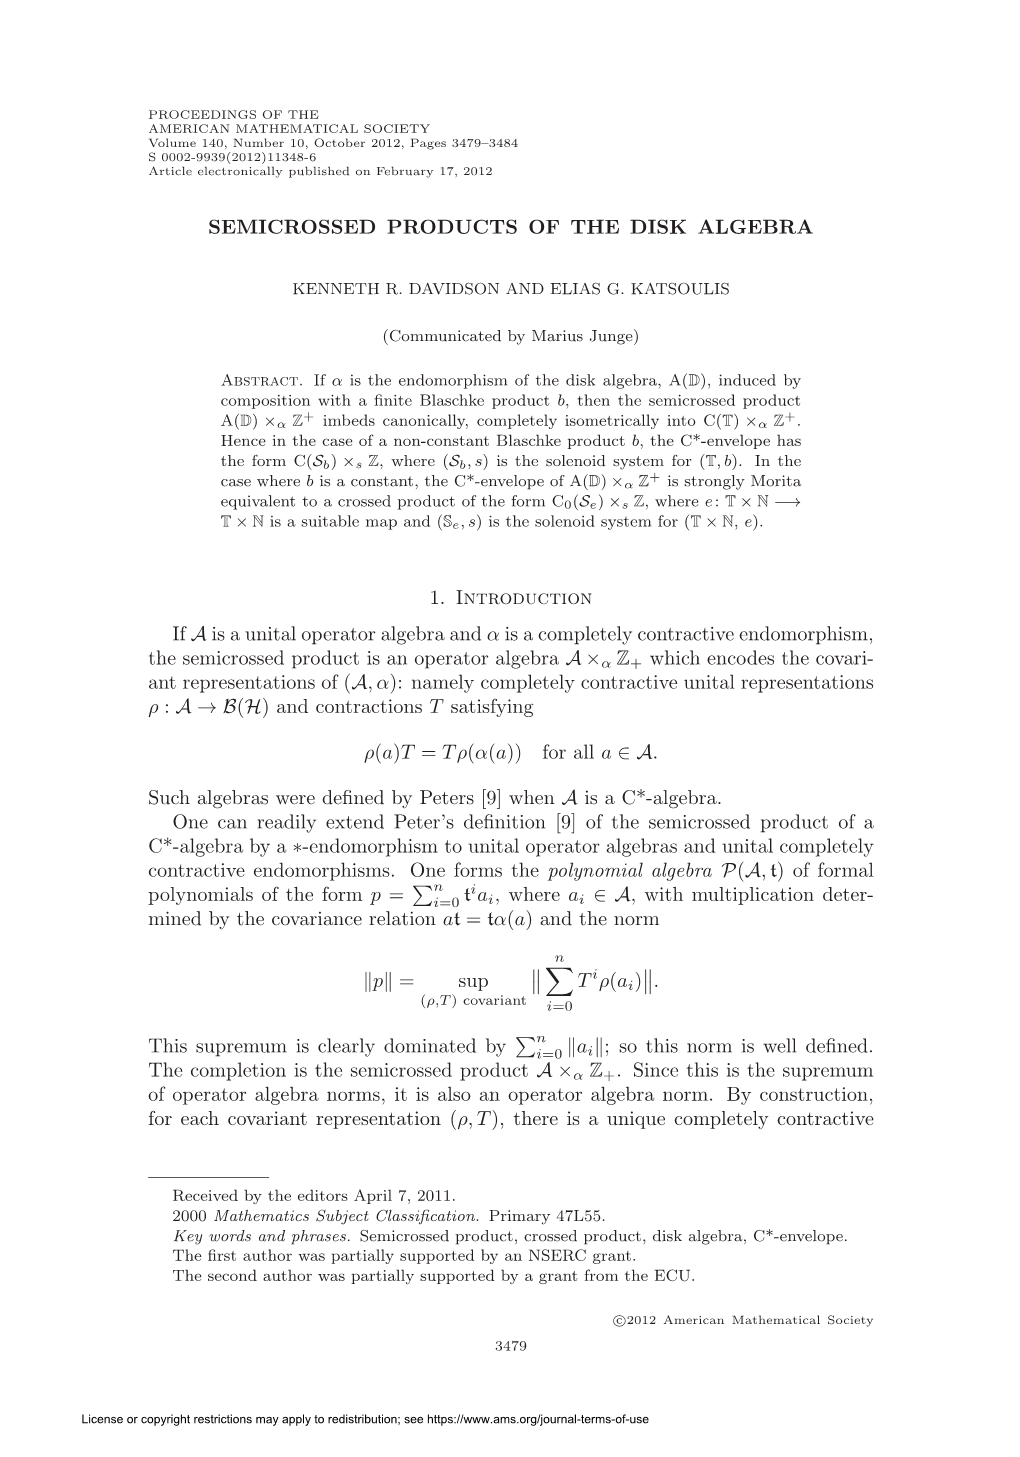 Semicrossed Products of the Disk Algebra